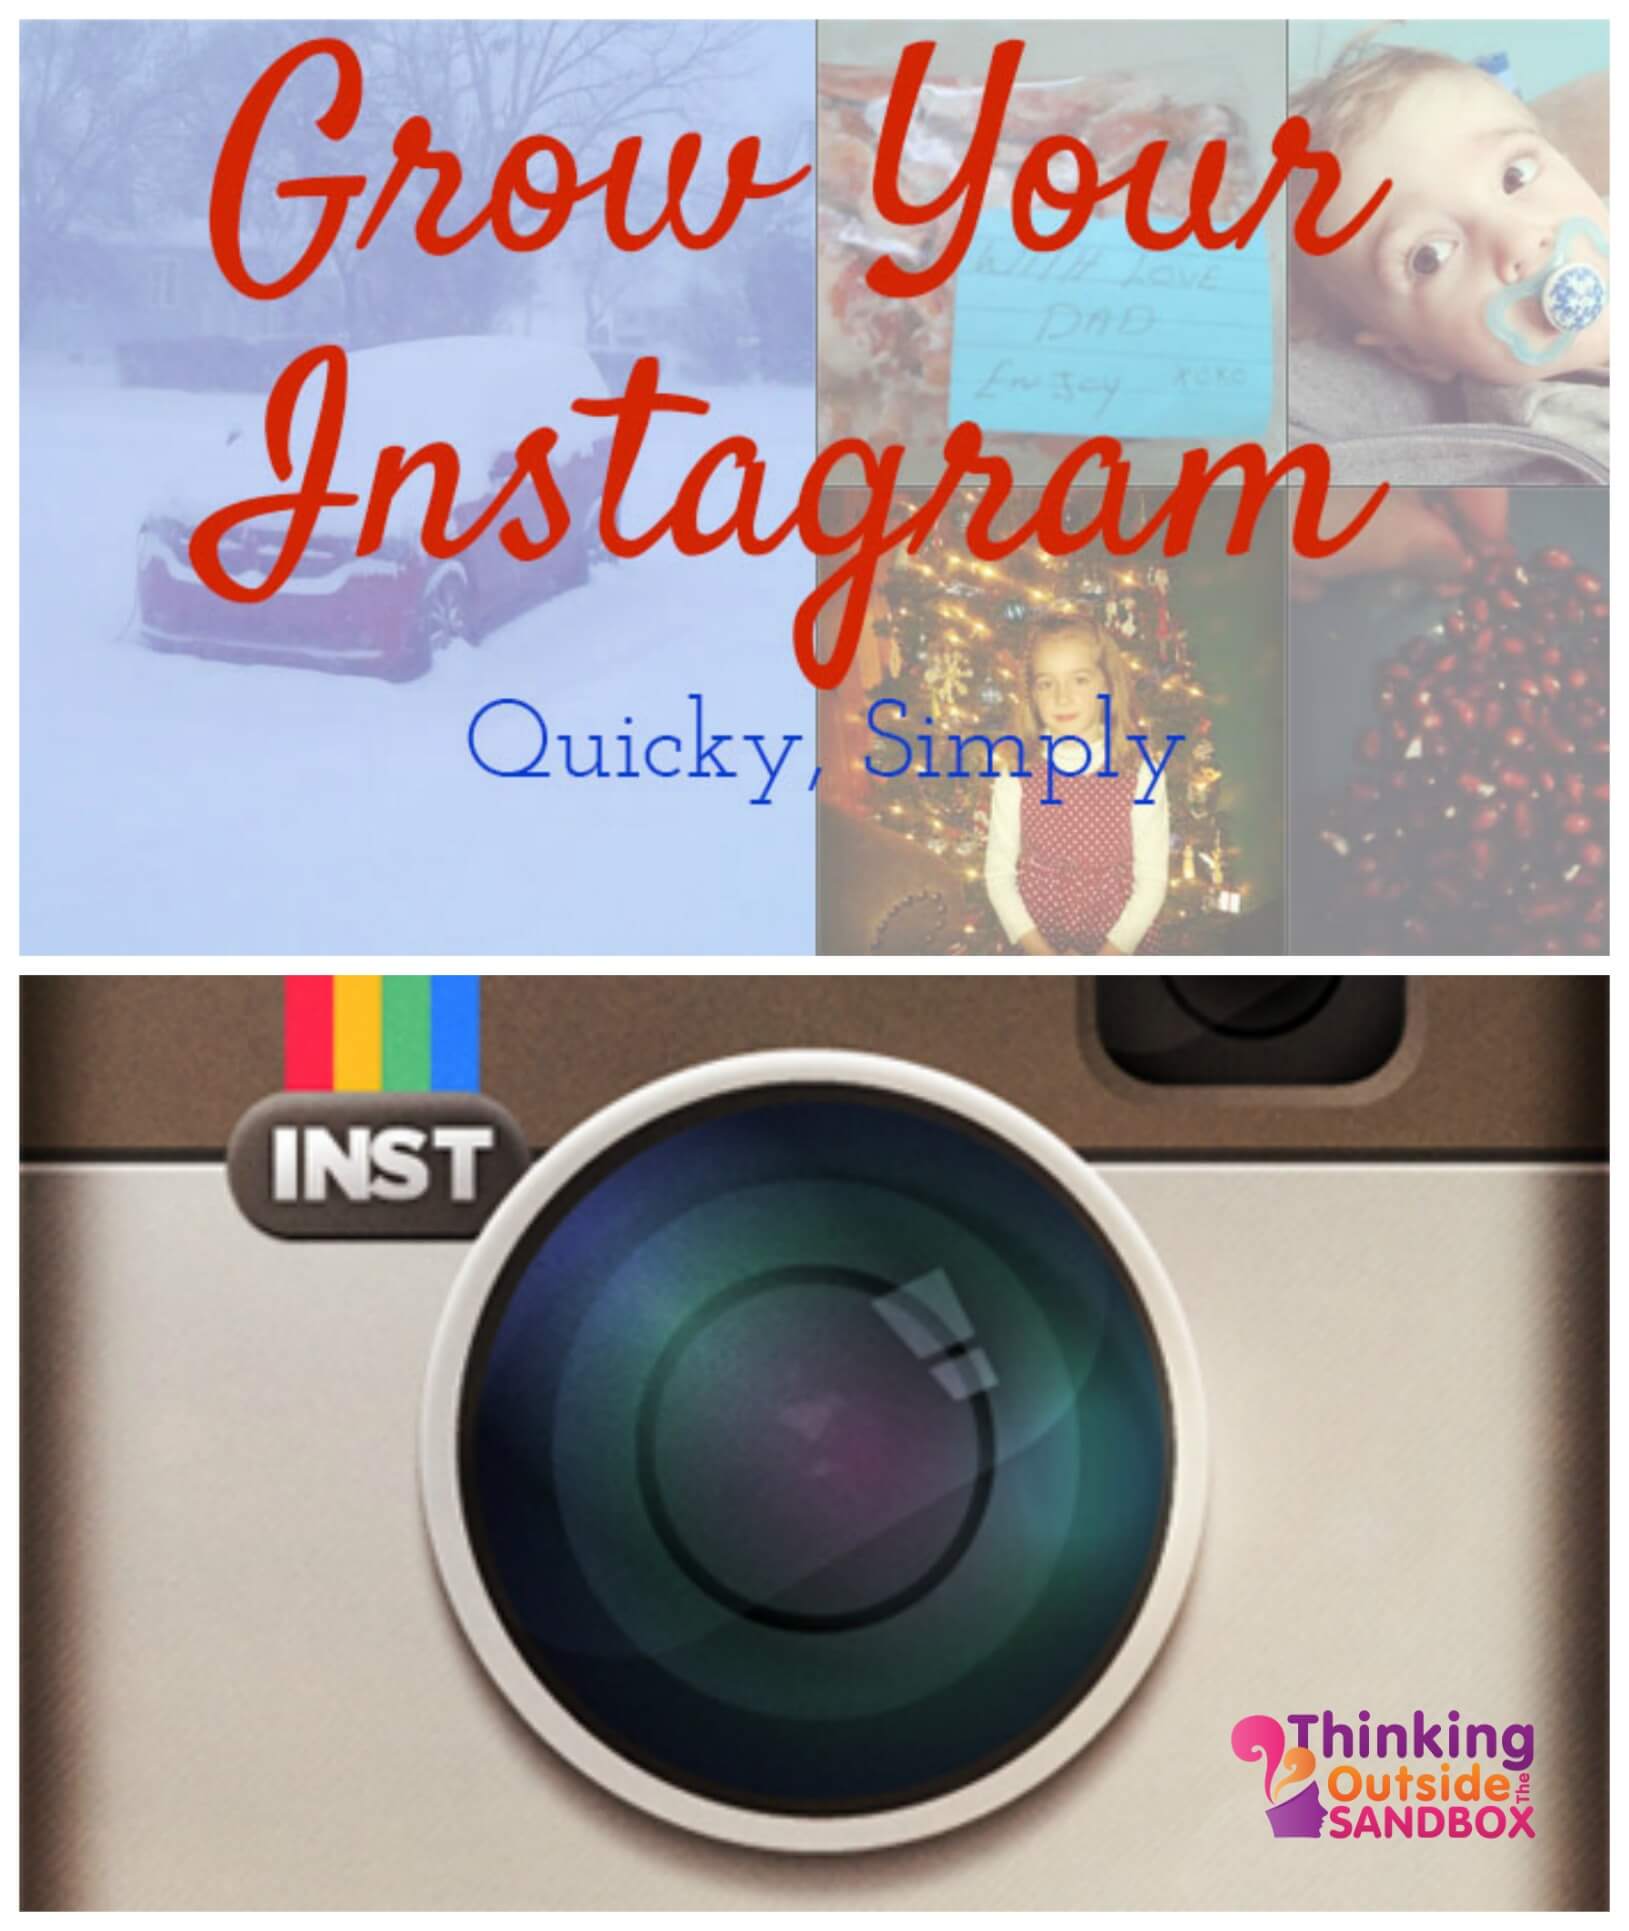 Grow Your Instagram Account, Quickly and Simply